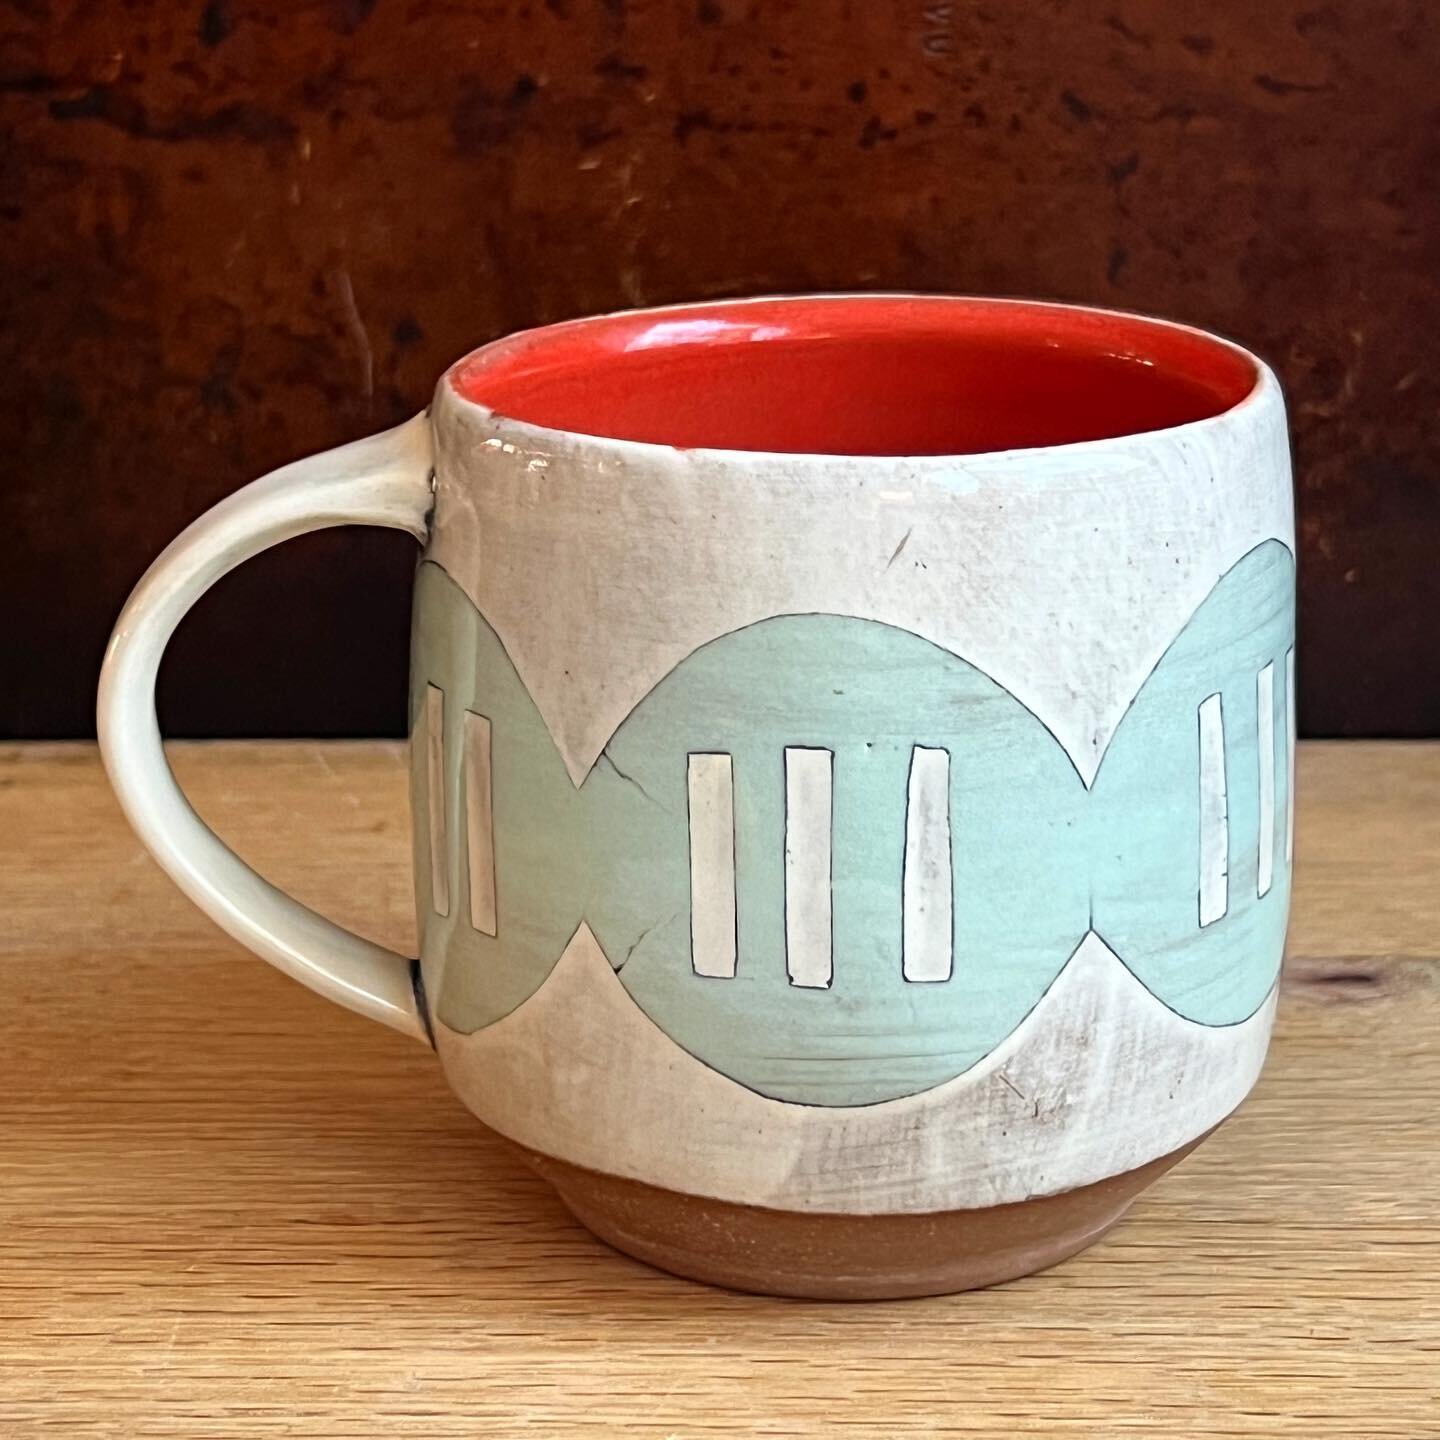 Still a few of these mugs left in the shop if you, like me, just started thinking about holiday shopping today&hellip; 😬😘🎁
.
.
#ceramics #mugs #functionalceramics #ceramicstudio #contemporaryclay #contemporarycraft